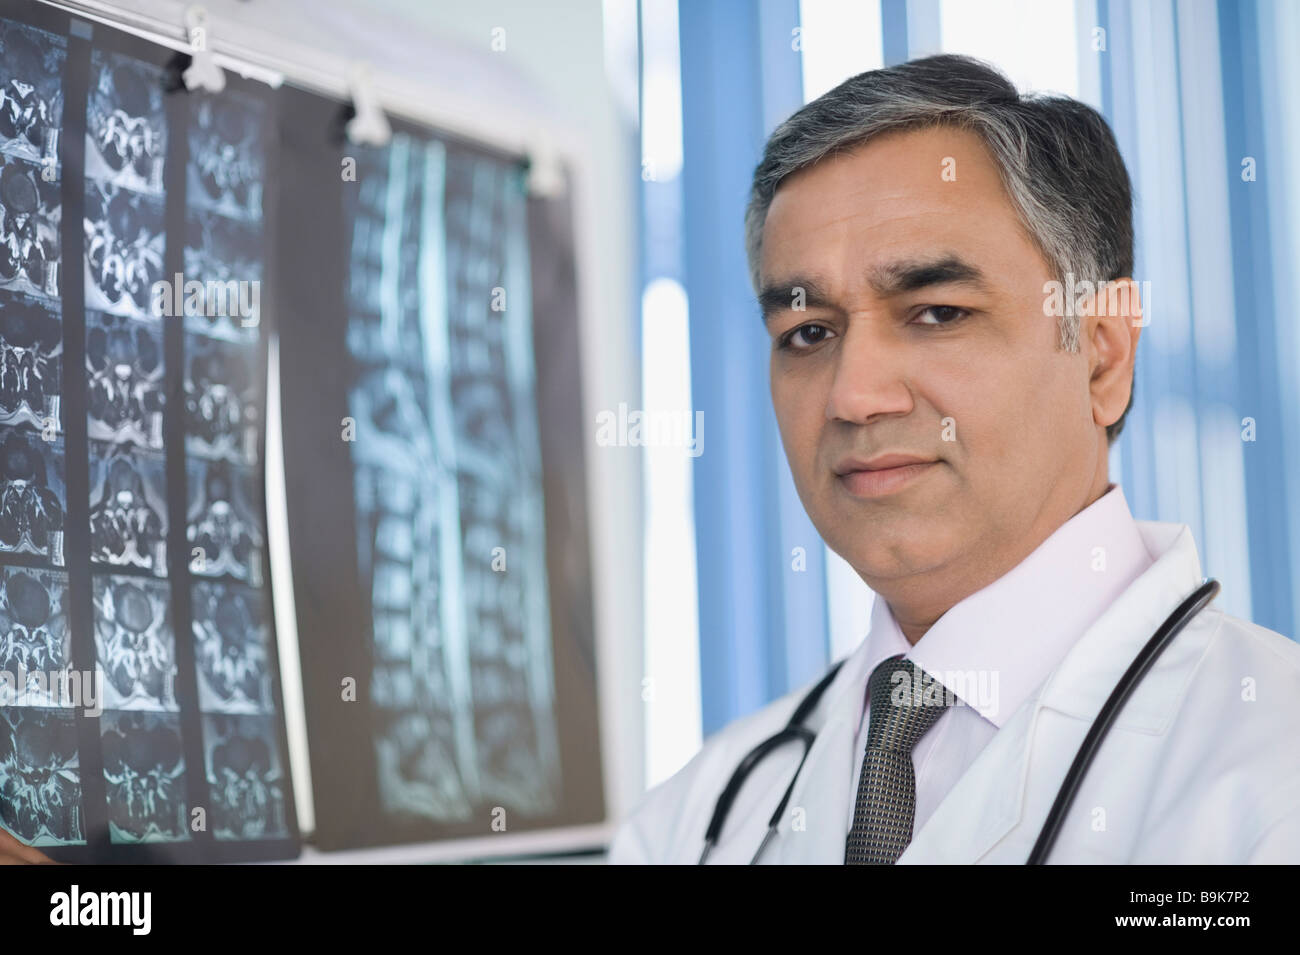 Doctor examining an x-ray report Stock Photo